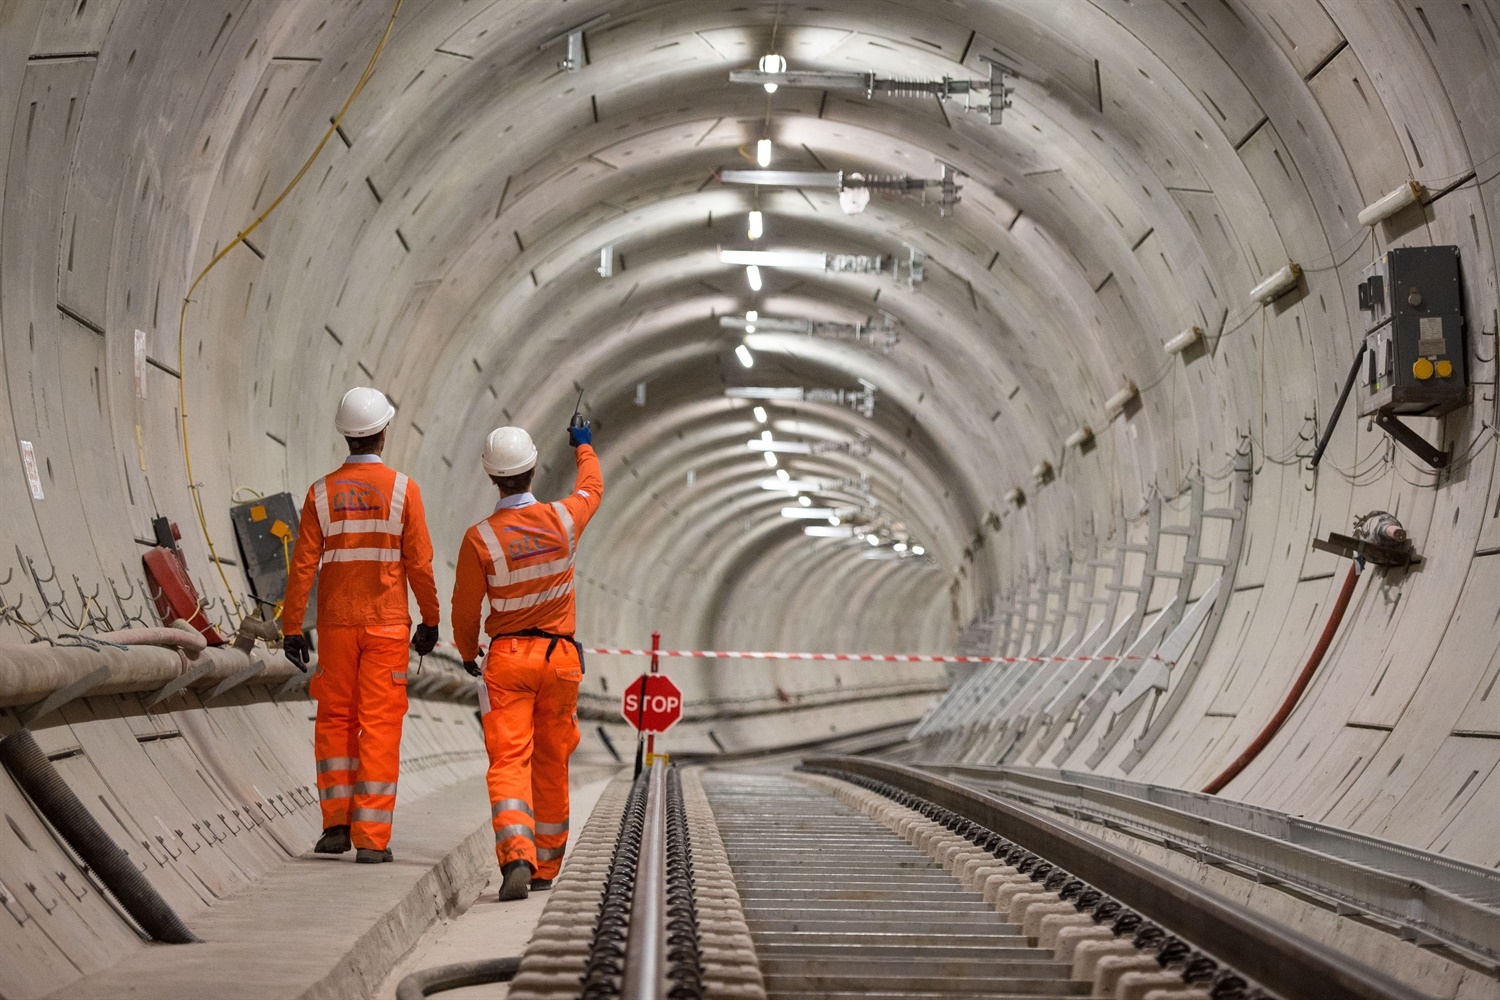 Crossrail bosses hope for new timetable estimate by April but Khan admits there is no confidence about opening date